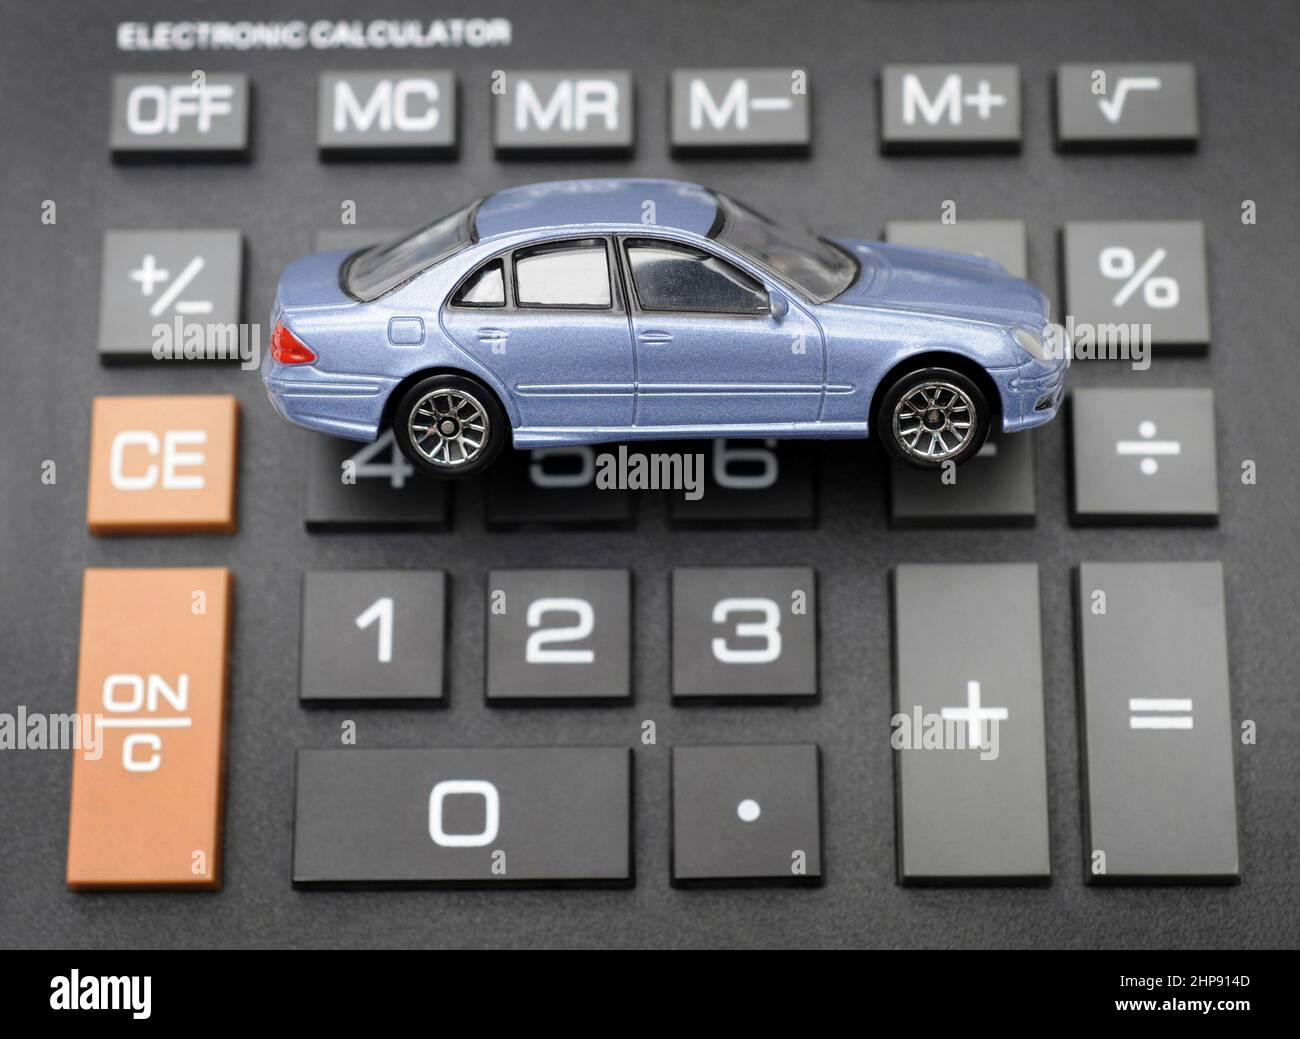 MODEL CAR ON CALCULATOR RE INSURANCE COSTS BUYING REPAIRS TAX EMISSIONS ETC UK Stock Photo